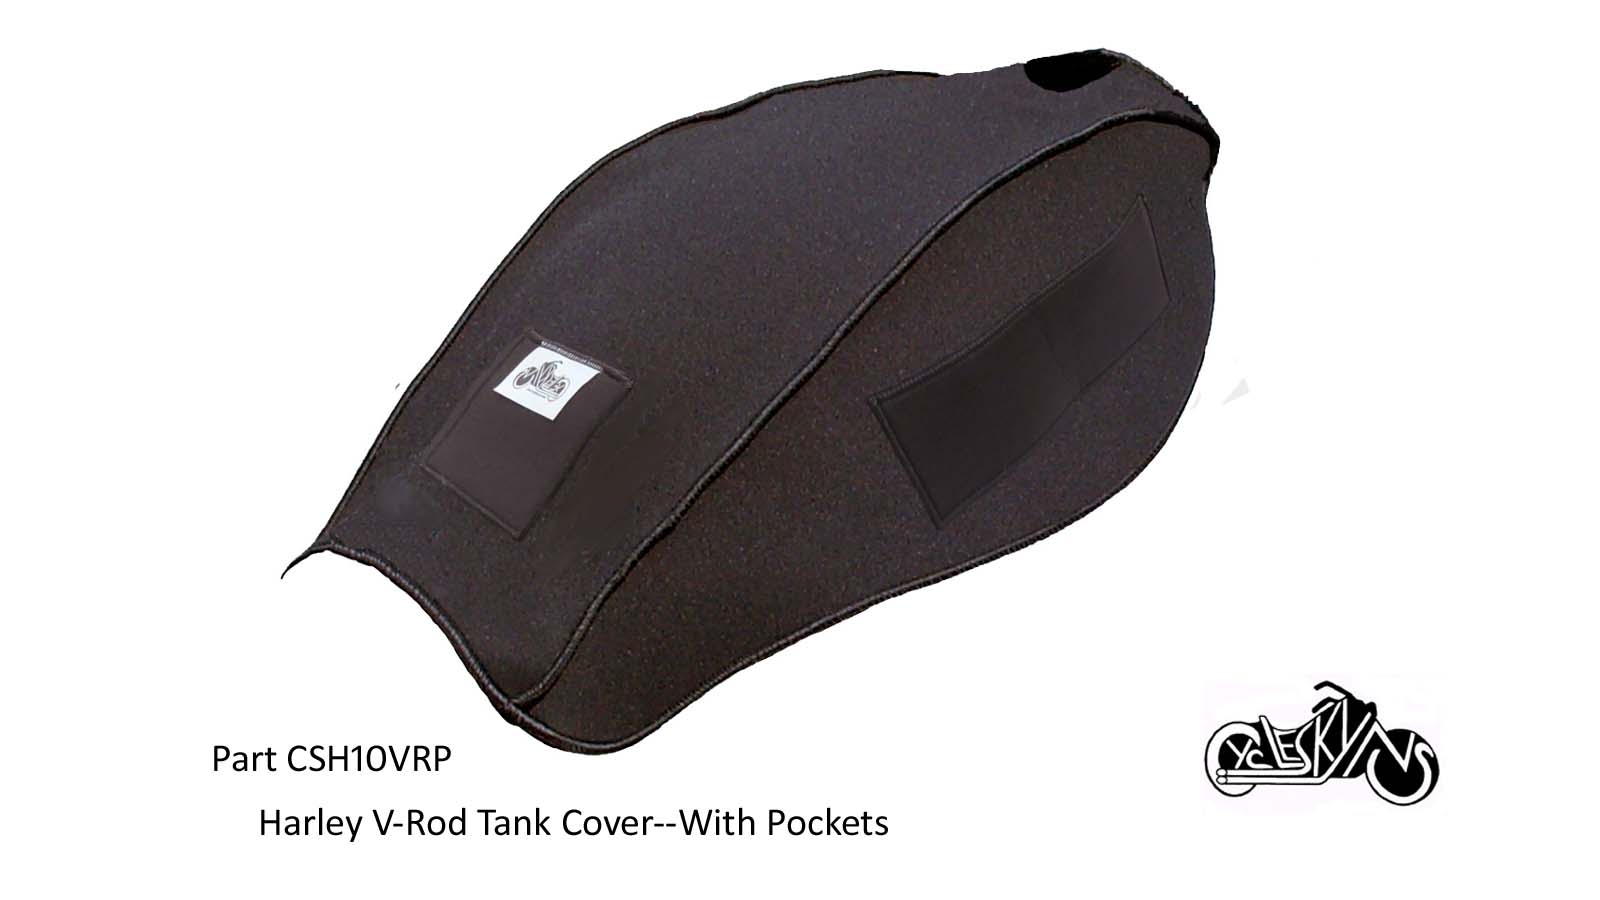 Neoprene Protective mechanic's Cover designed for the V-Rod shaped Harley Davidson gas tank. This cover has 1 top and 2 side pockets.